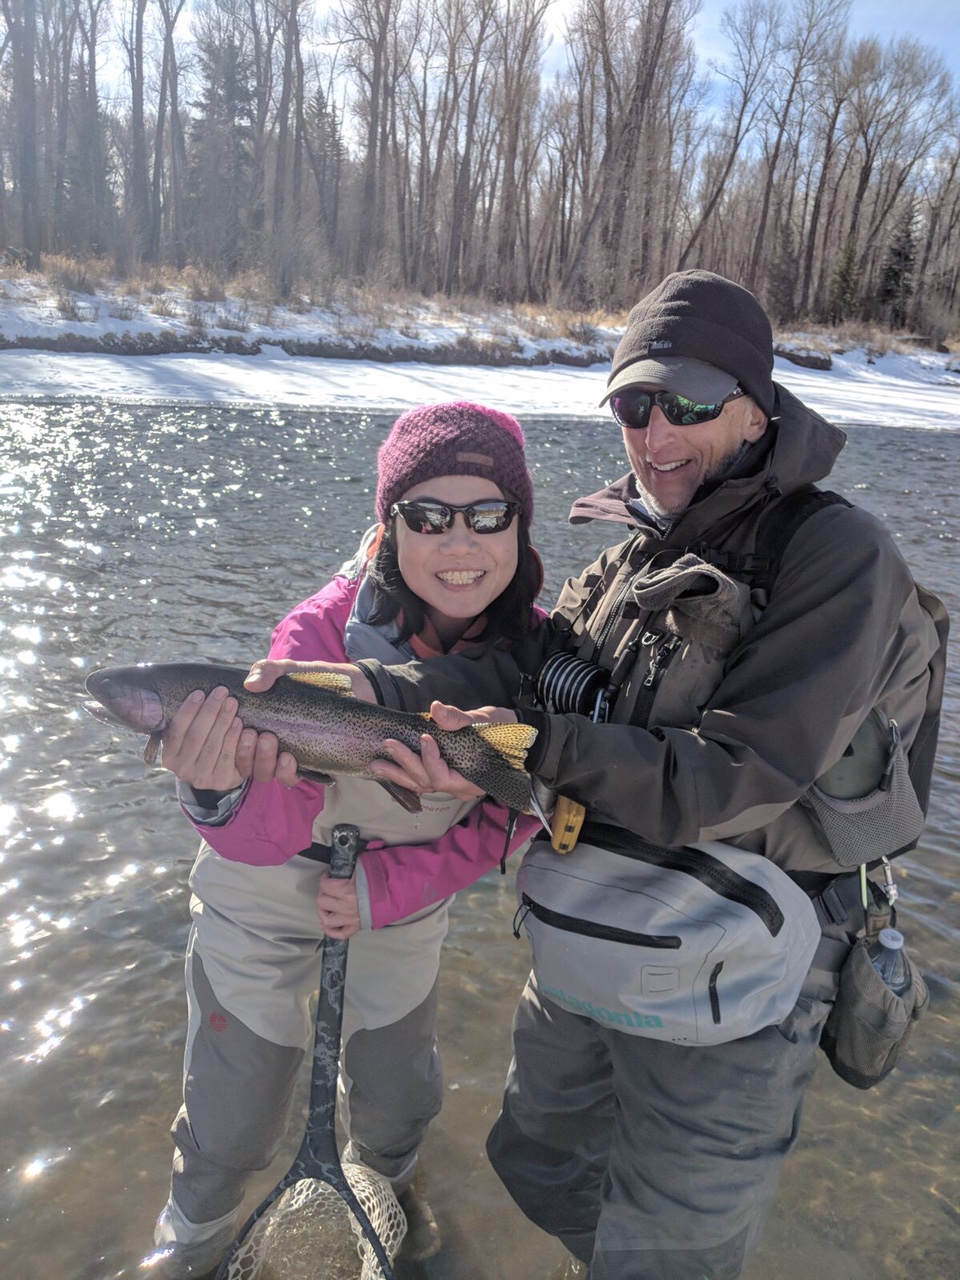 STAY WARM OUT THERE – How to be Comfortable when Fishing in Cold